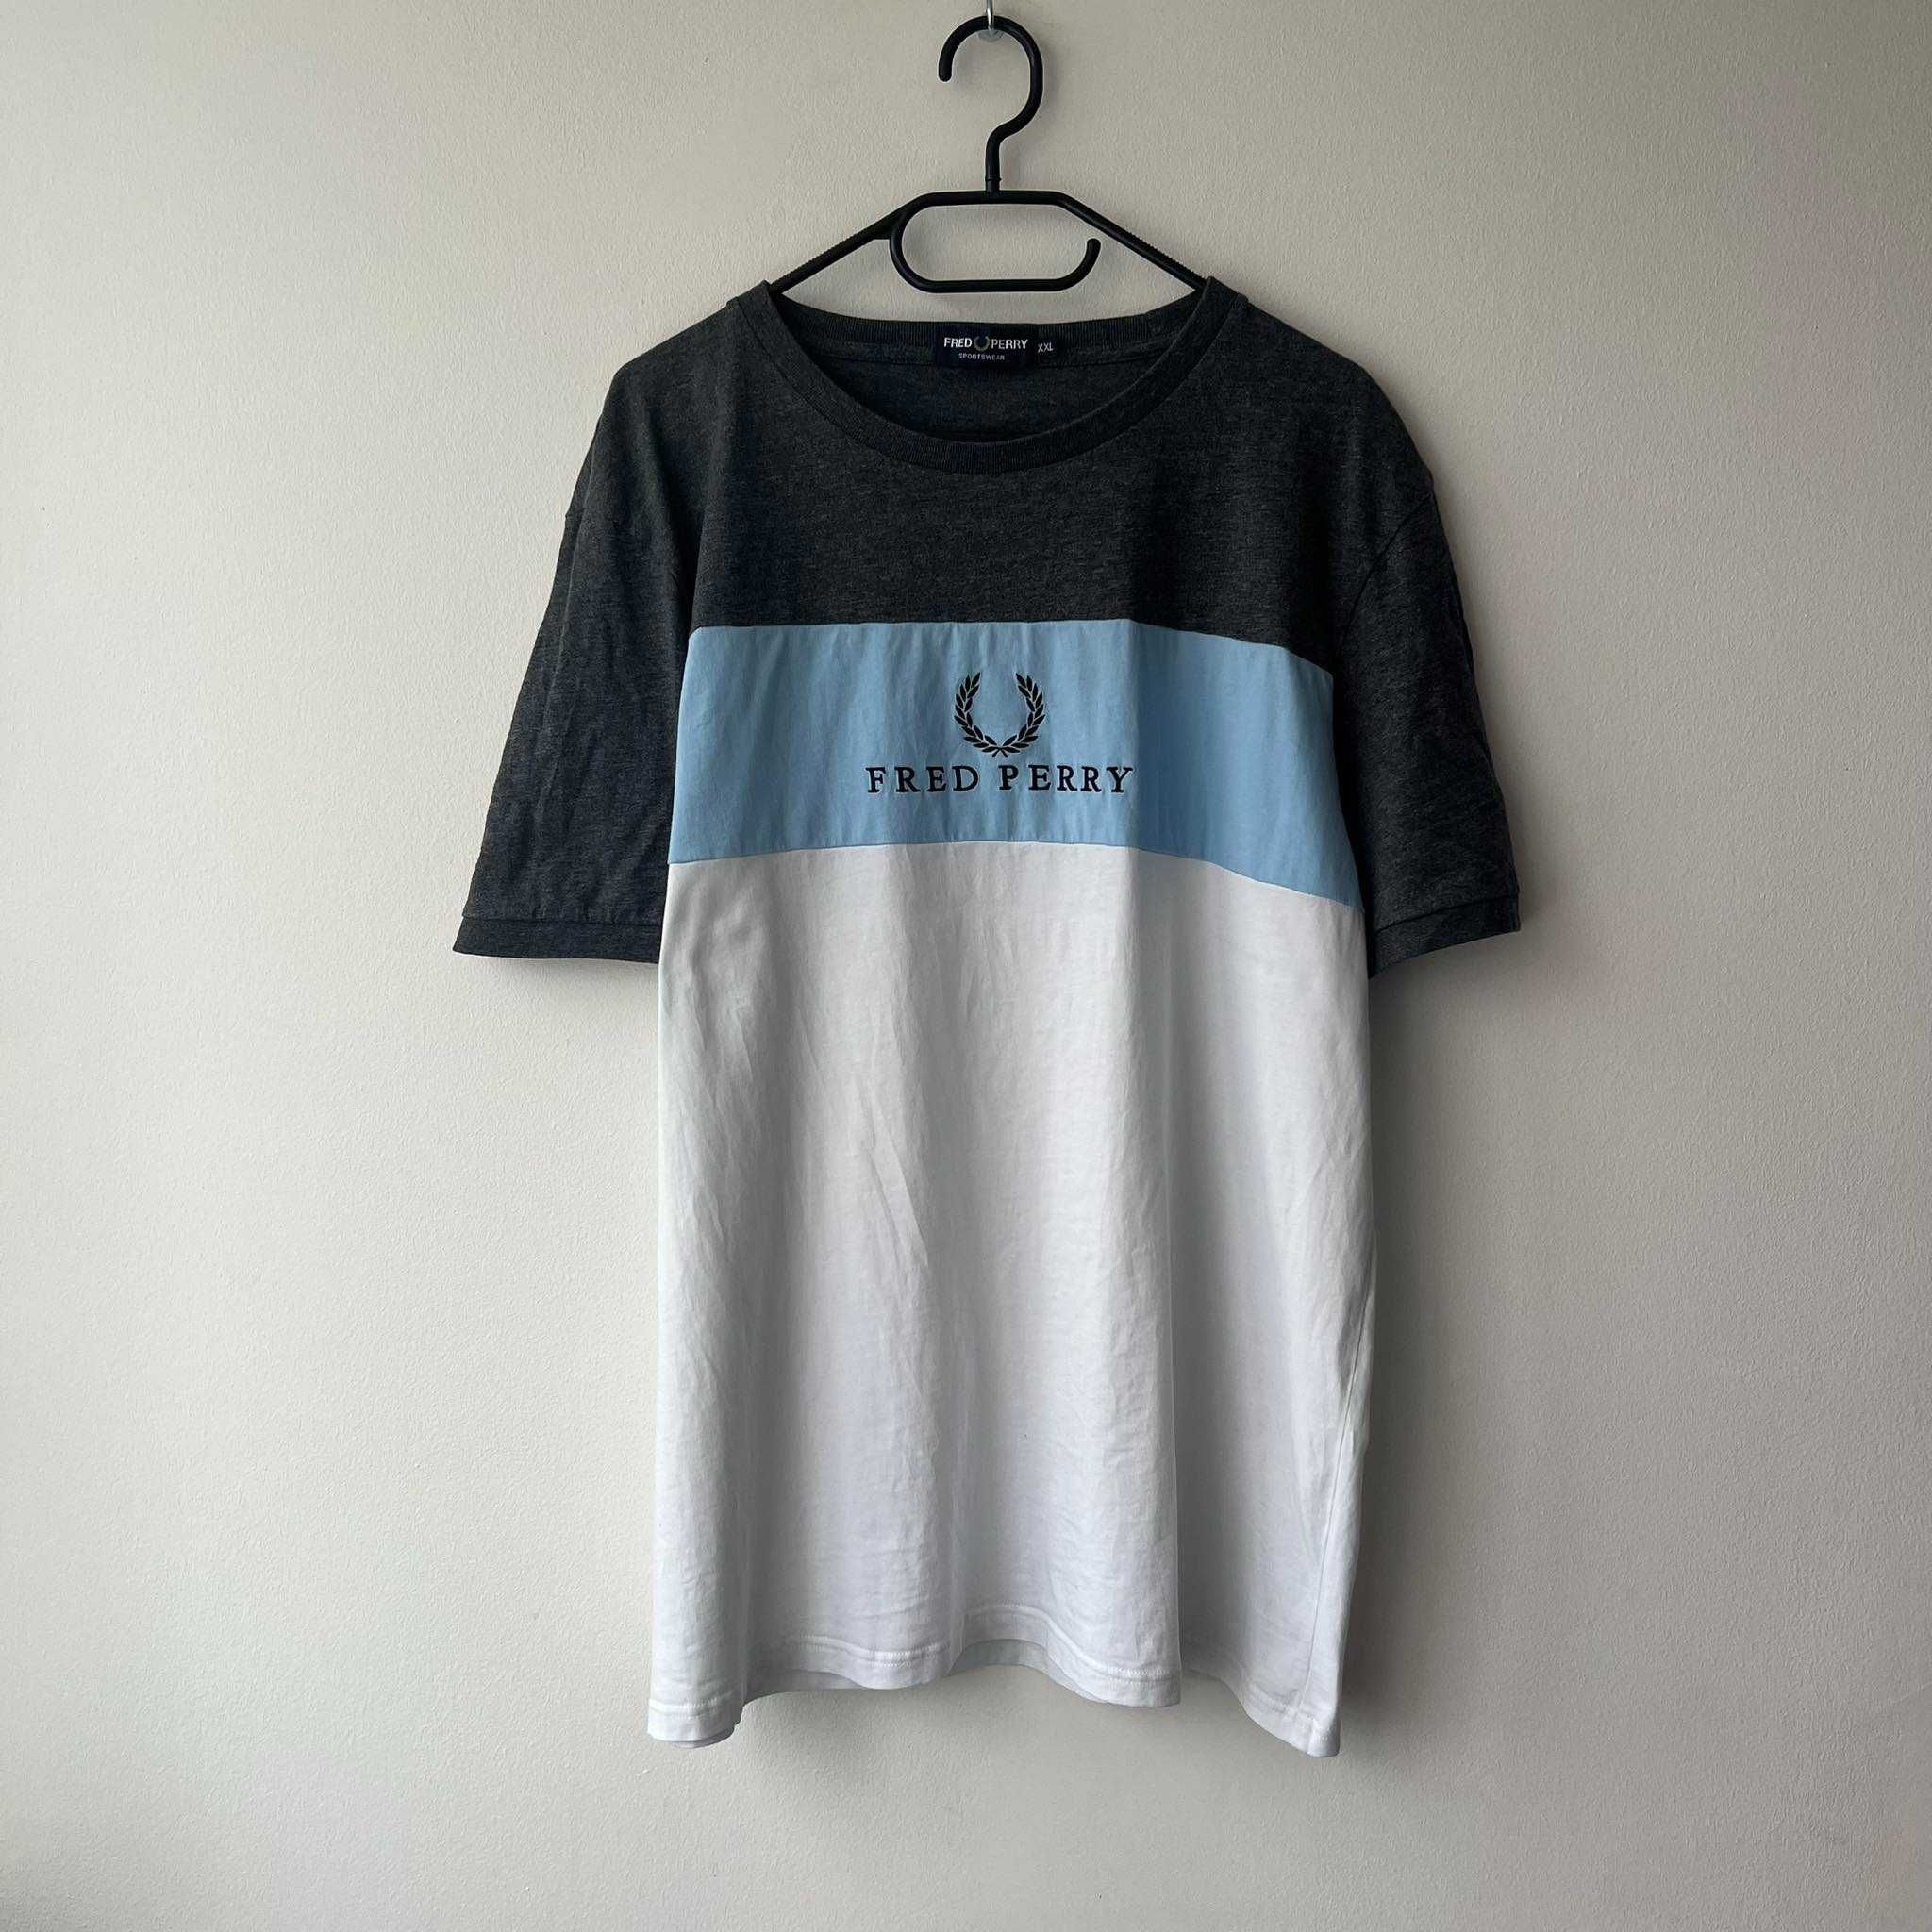 Fred Perry Stitched Logo T-Shirt Dark Grey / Baby Blue